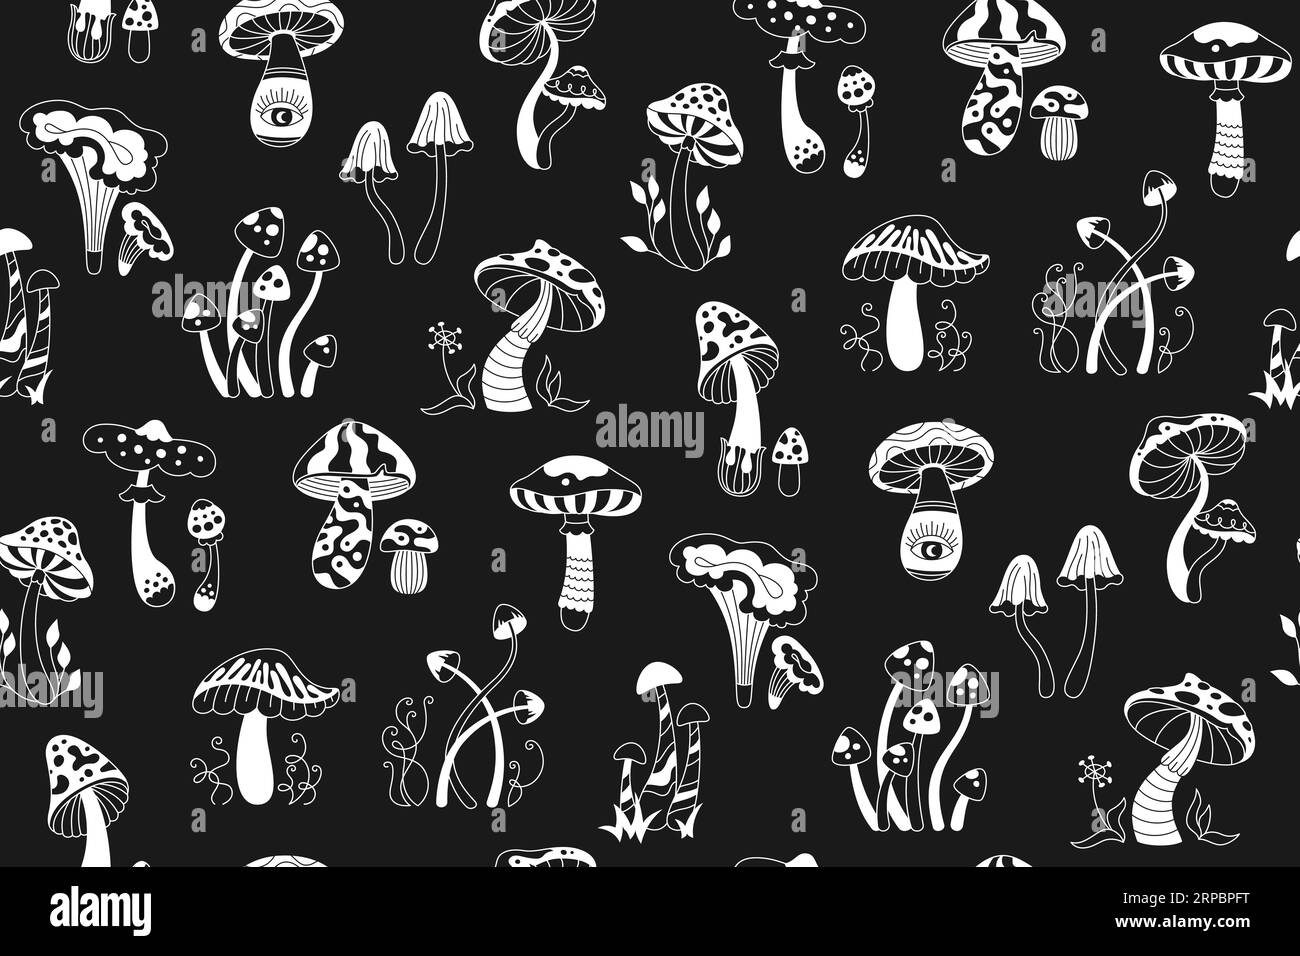 Mushrooms boho magic seamless pattern. Poisonous psychedelic mushroom black and white endless background, doodle style wrapper. Magic fungus repeat ornament template for fabric flyer, card, postcard Stock Vector